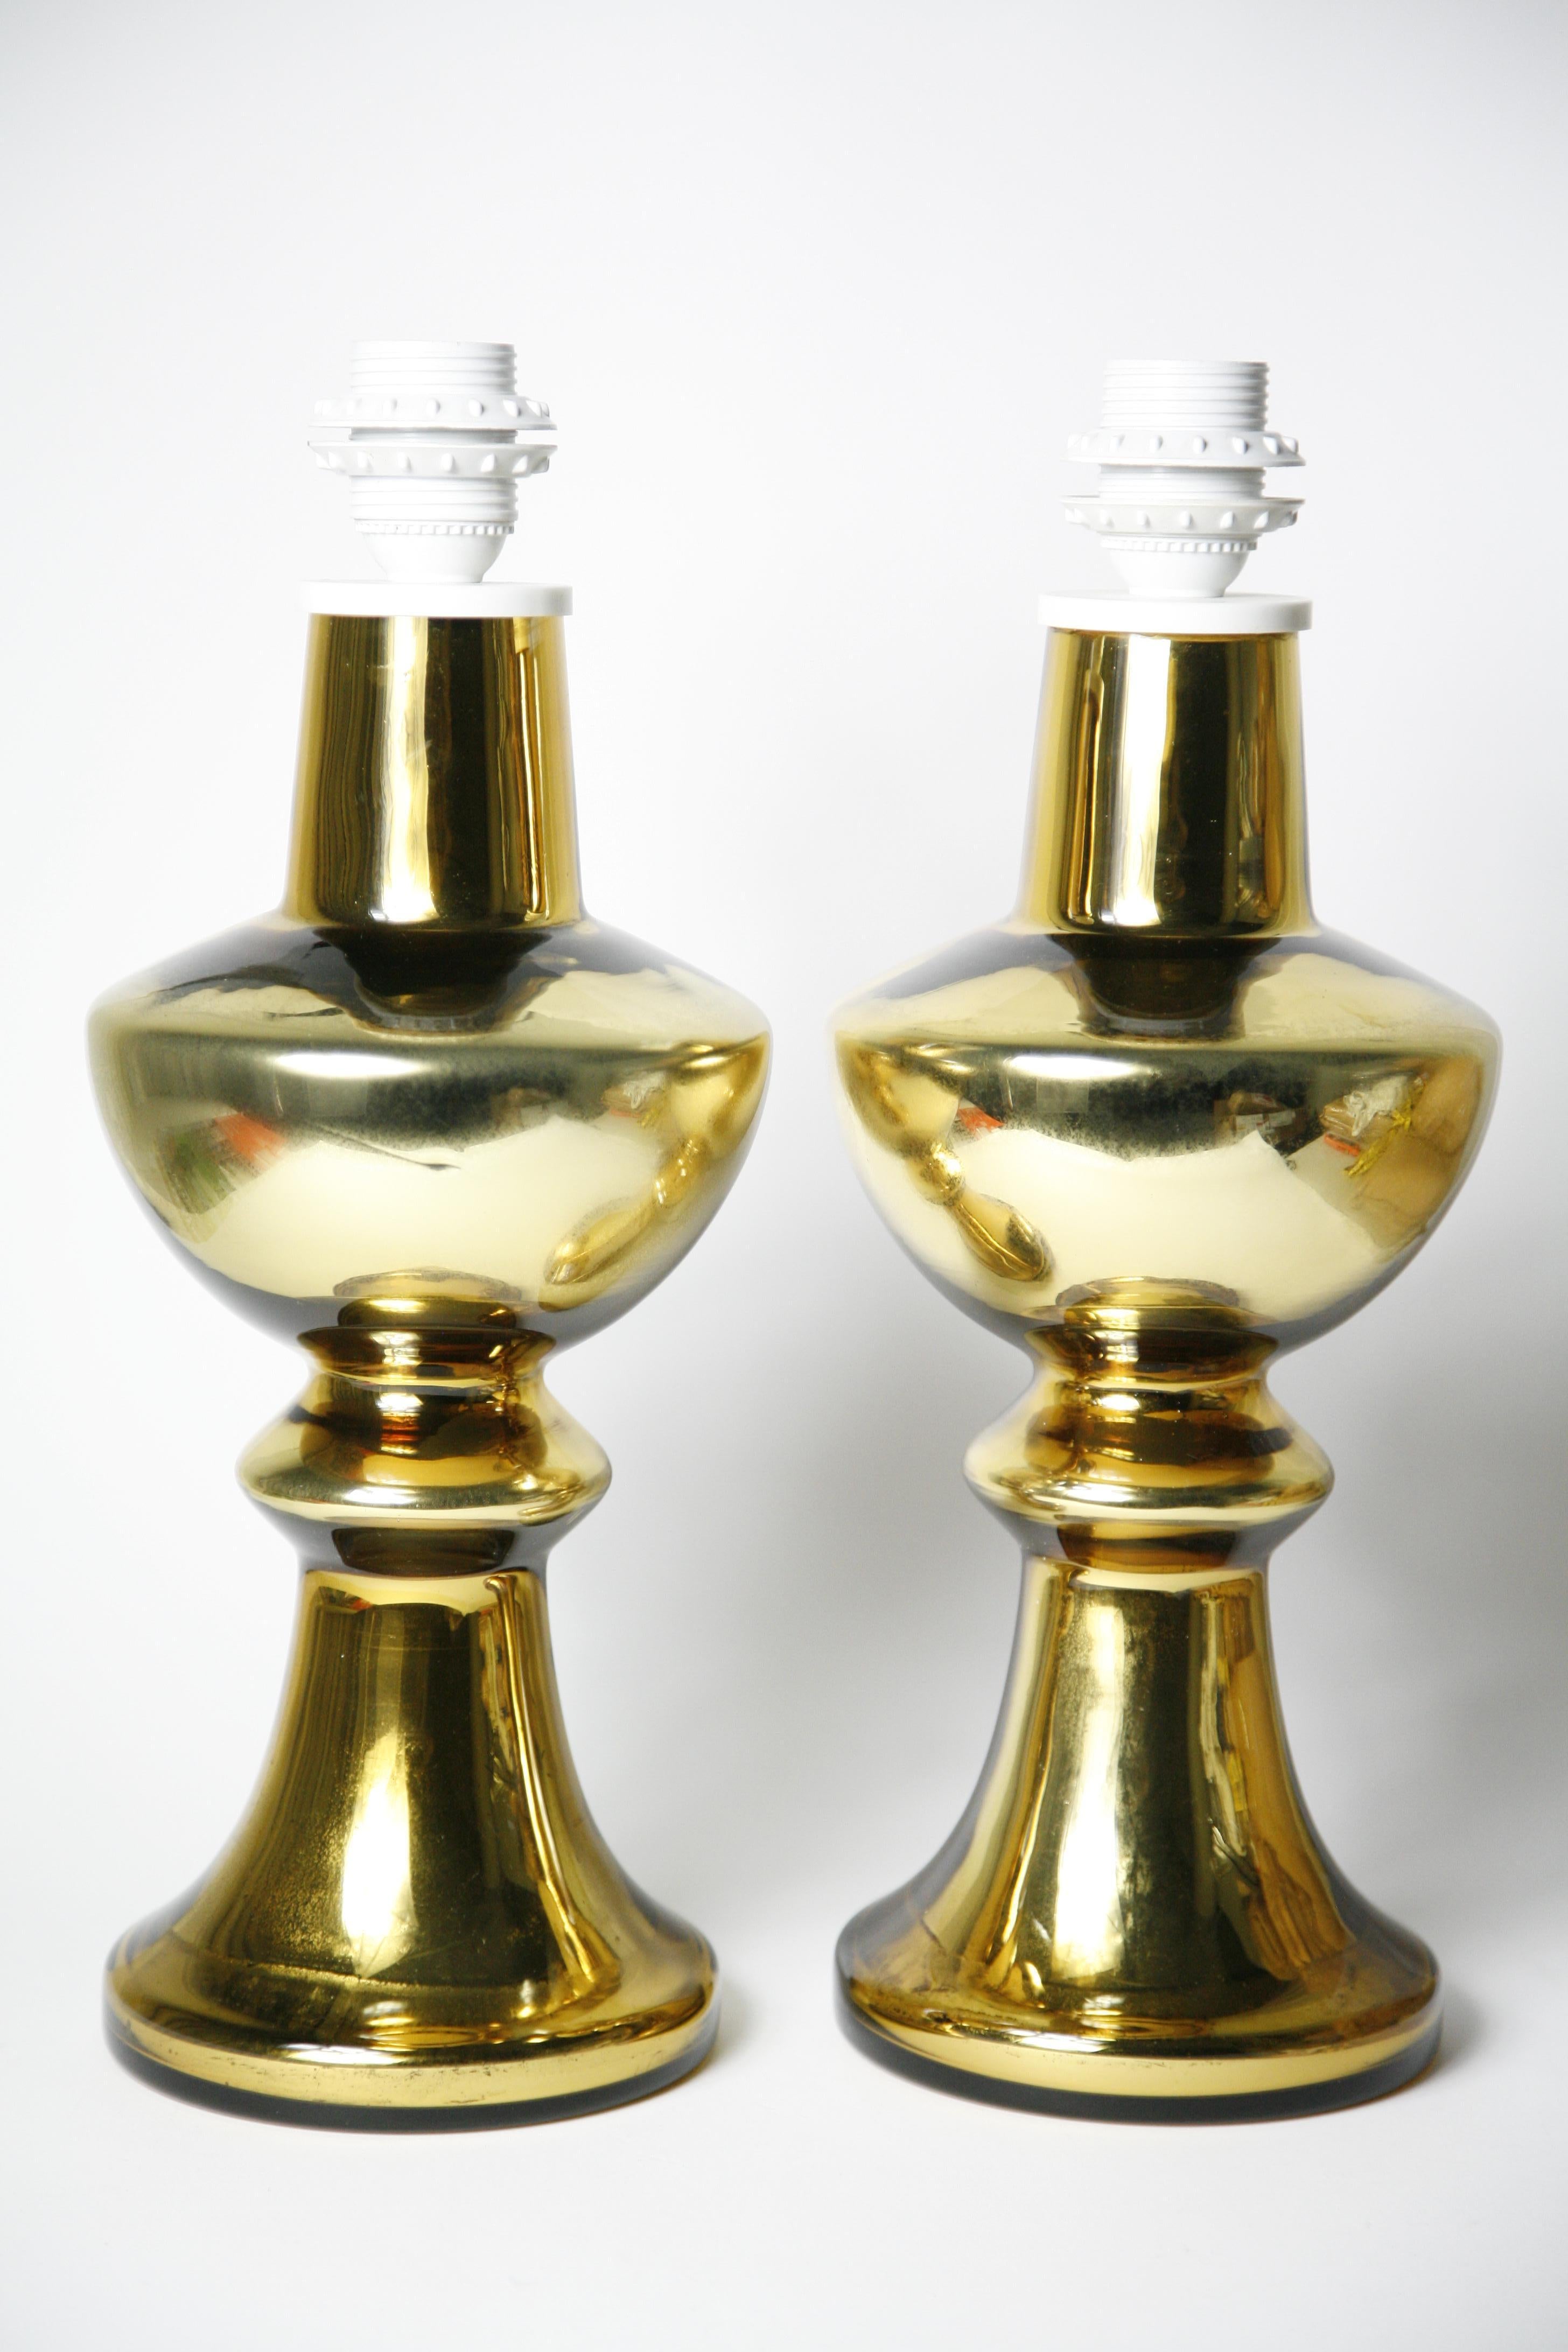 Pair of Gold Glass Encased Lamps with Patina by Flygsfors, Sweden, 1970 For Sale 4